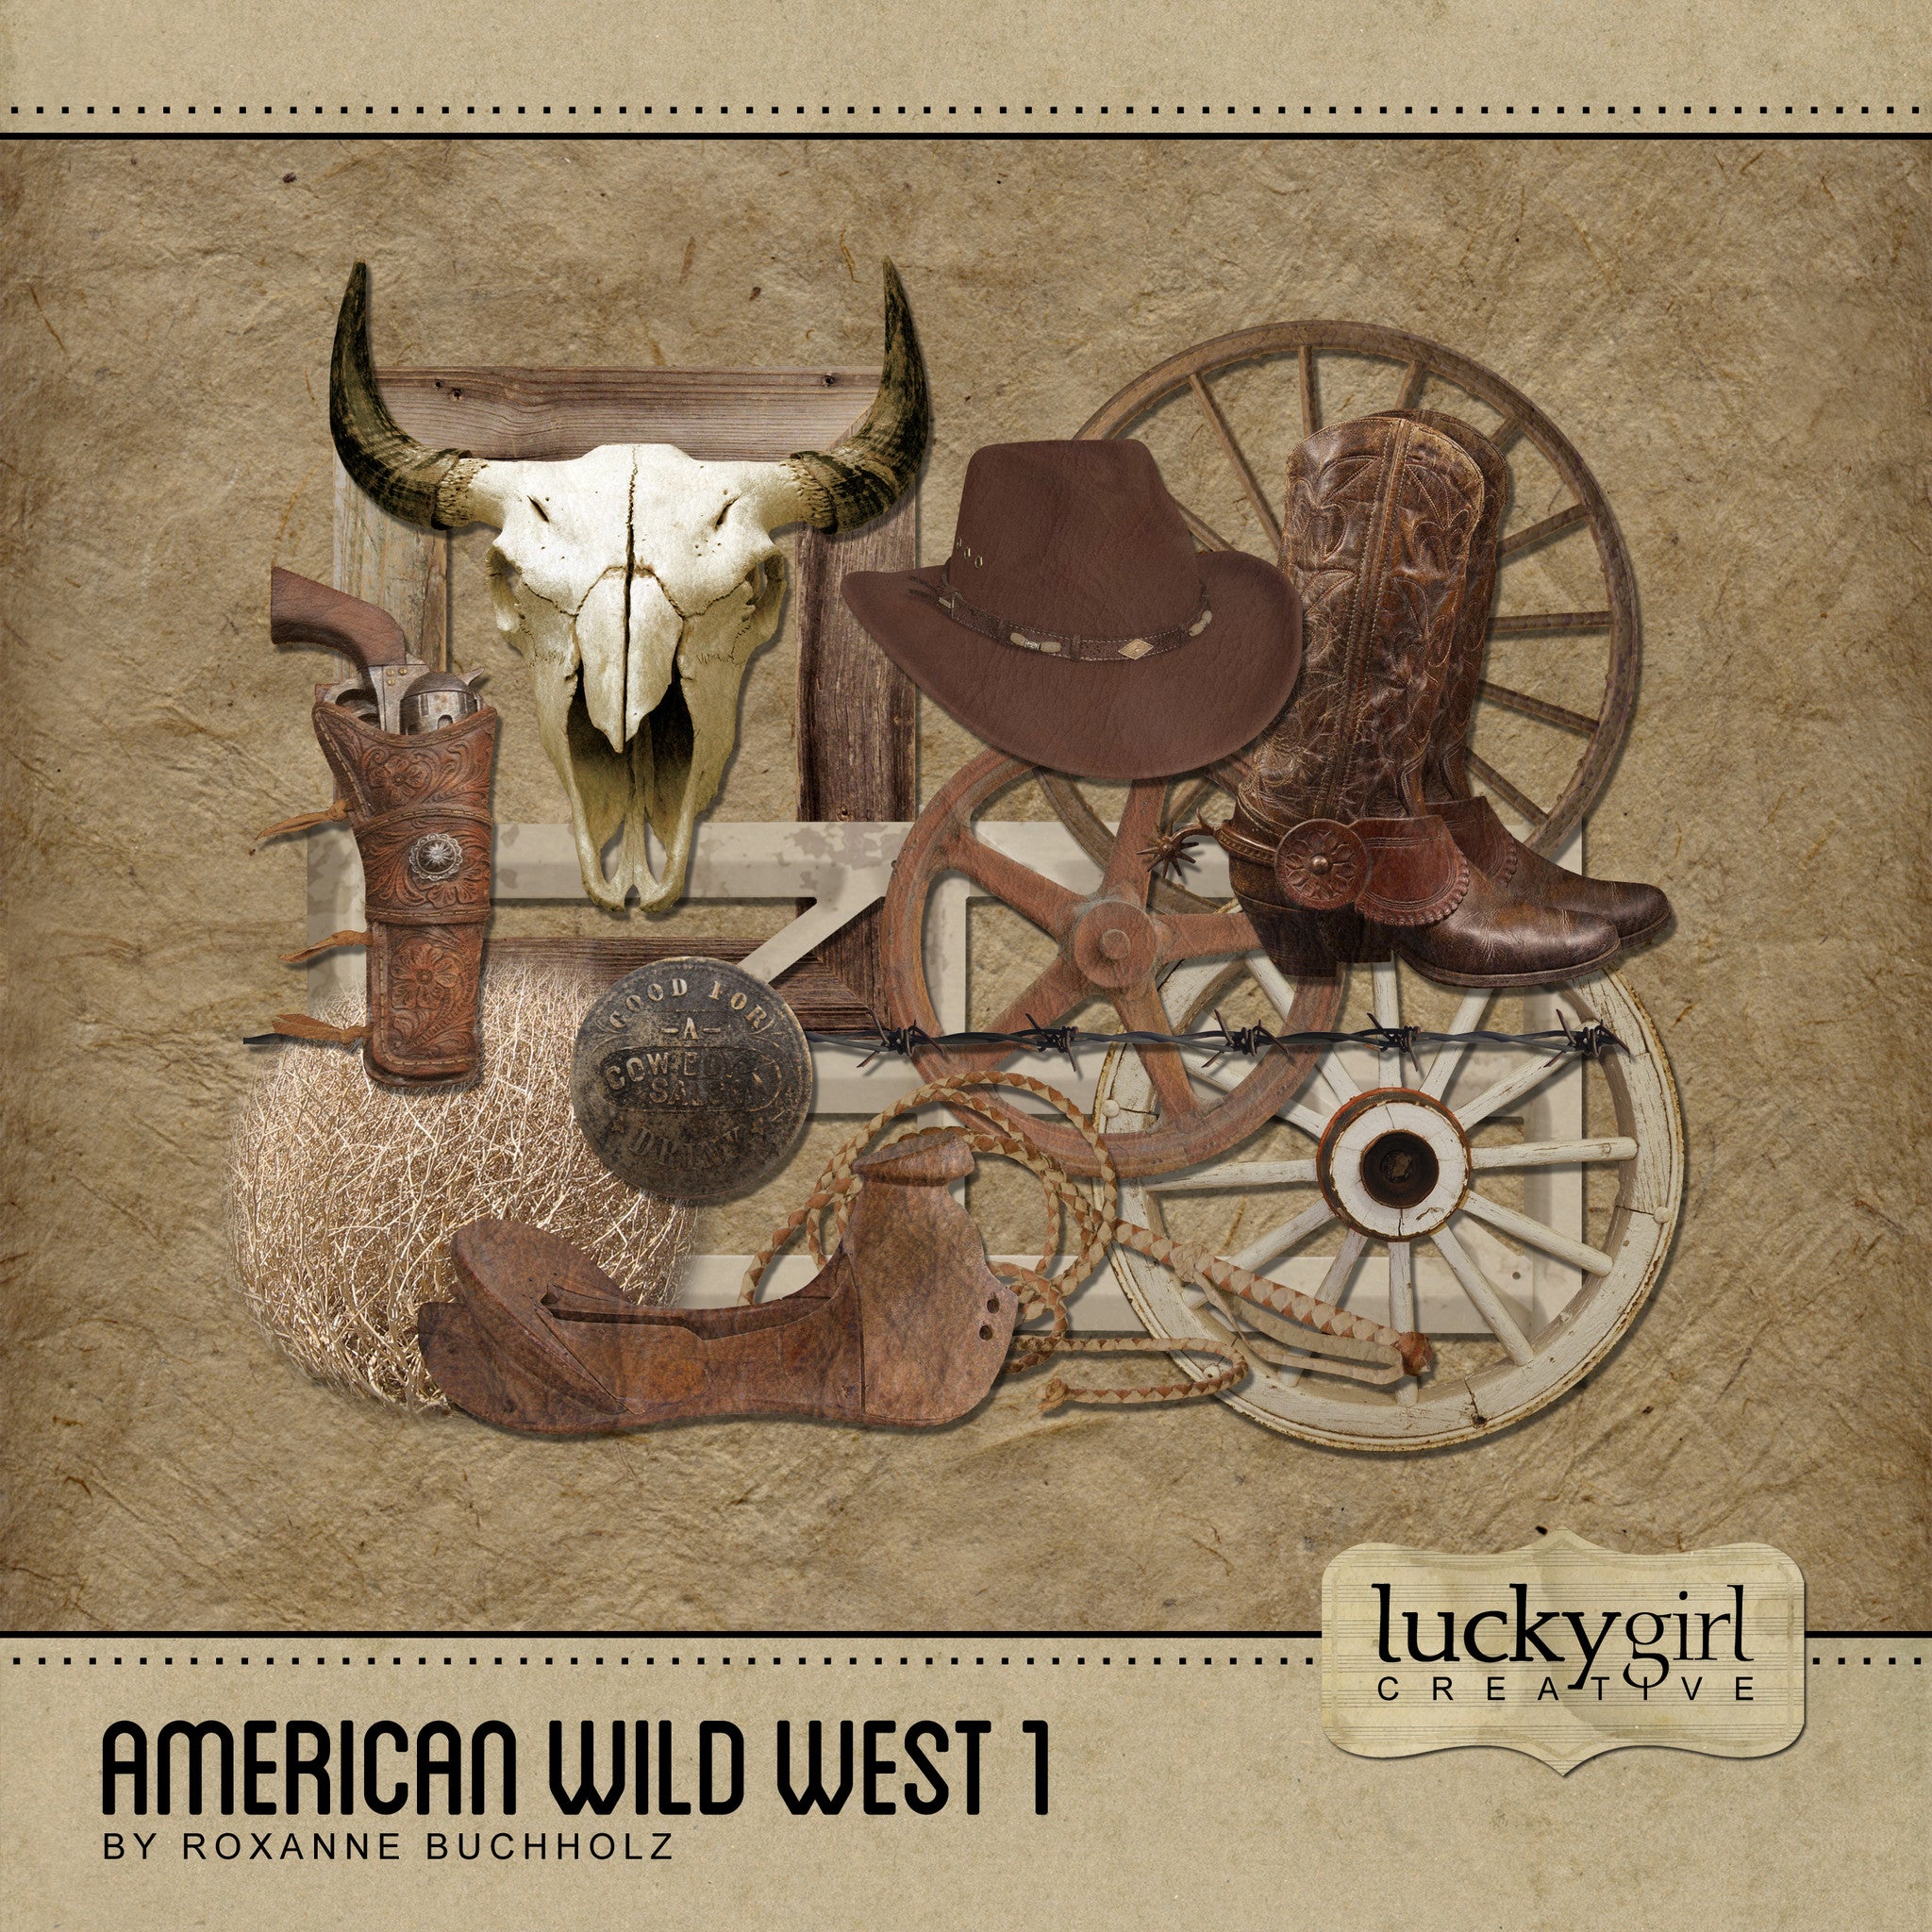 The most popular of all the Lucky Girl Creative digital art collections with its antique Western theme, American Wild West 1 Digital Scrapbook Kit is the perfect collection for rodeo and cowboy pages and projects. The antique color palette features white-washed elements, rustic wood tones, metal pieces and natural leather textures. 